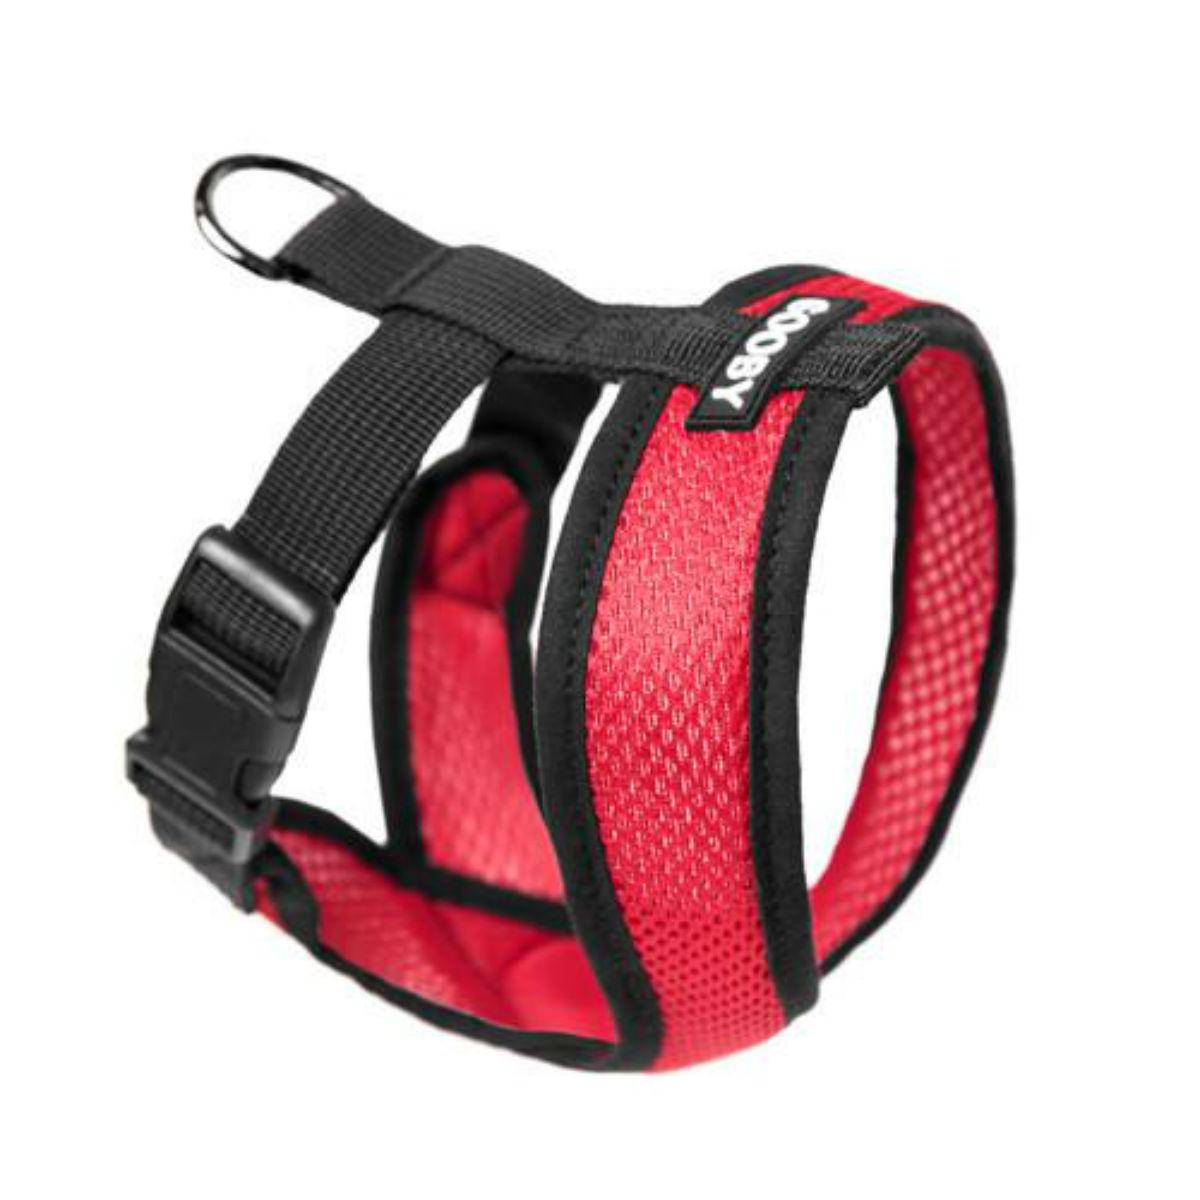 Comfort X Dog Harness by Gooby - Red